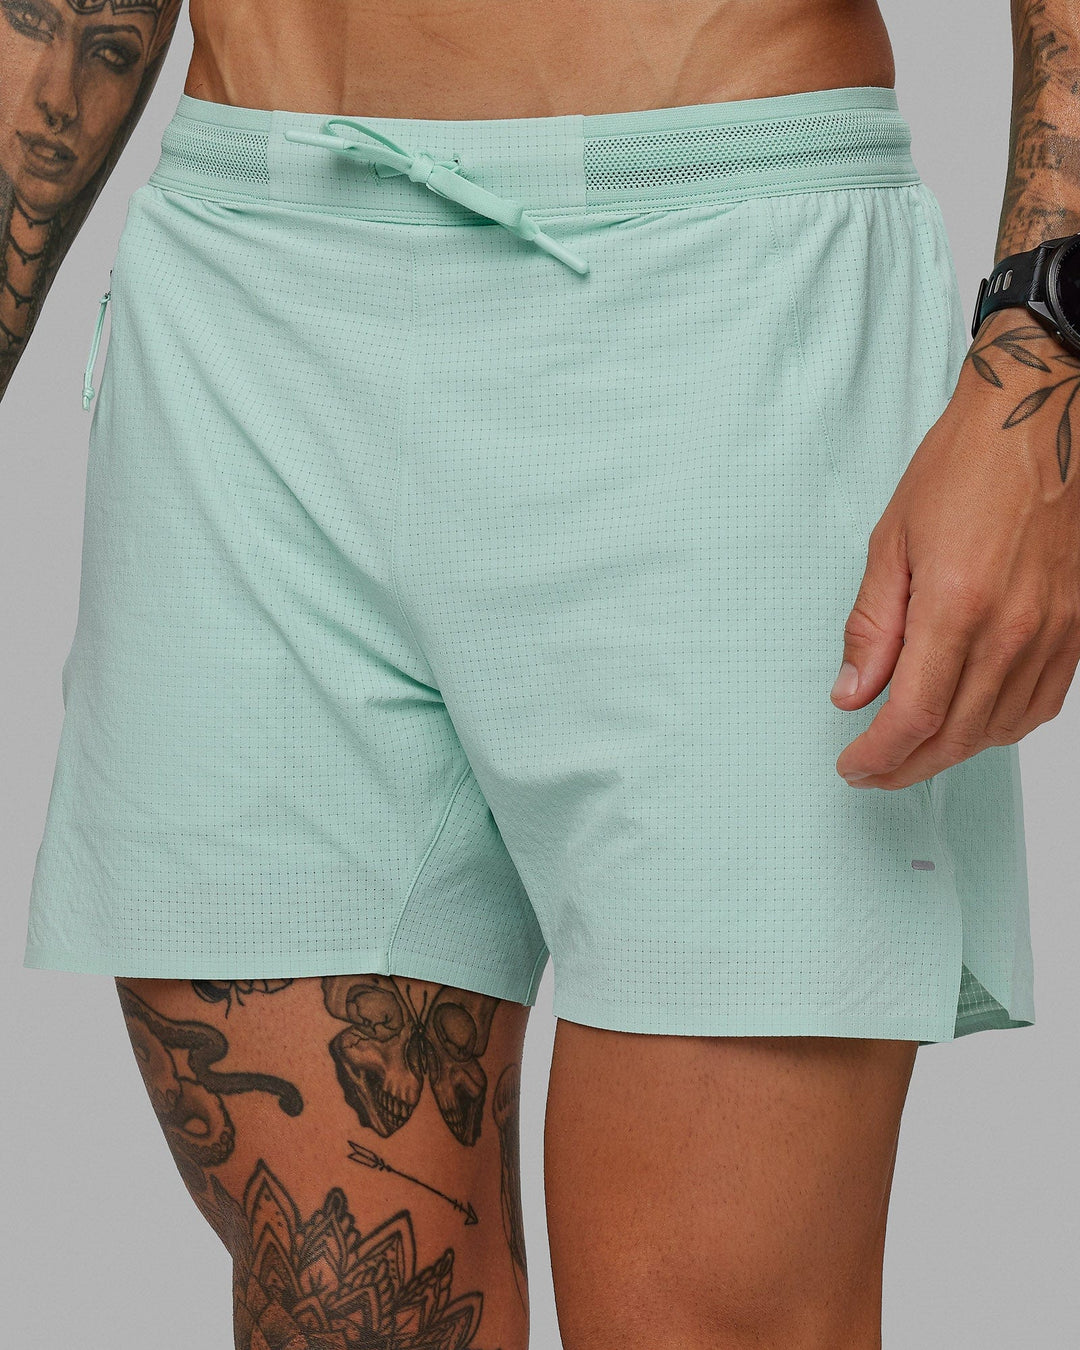 UltraAir 5" Lined Performance Short - Pastel Turquoise-Reflective